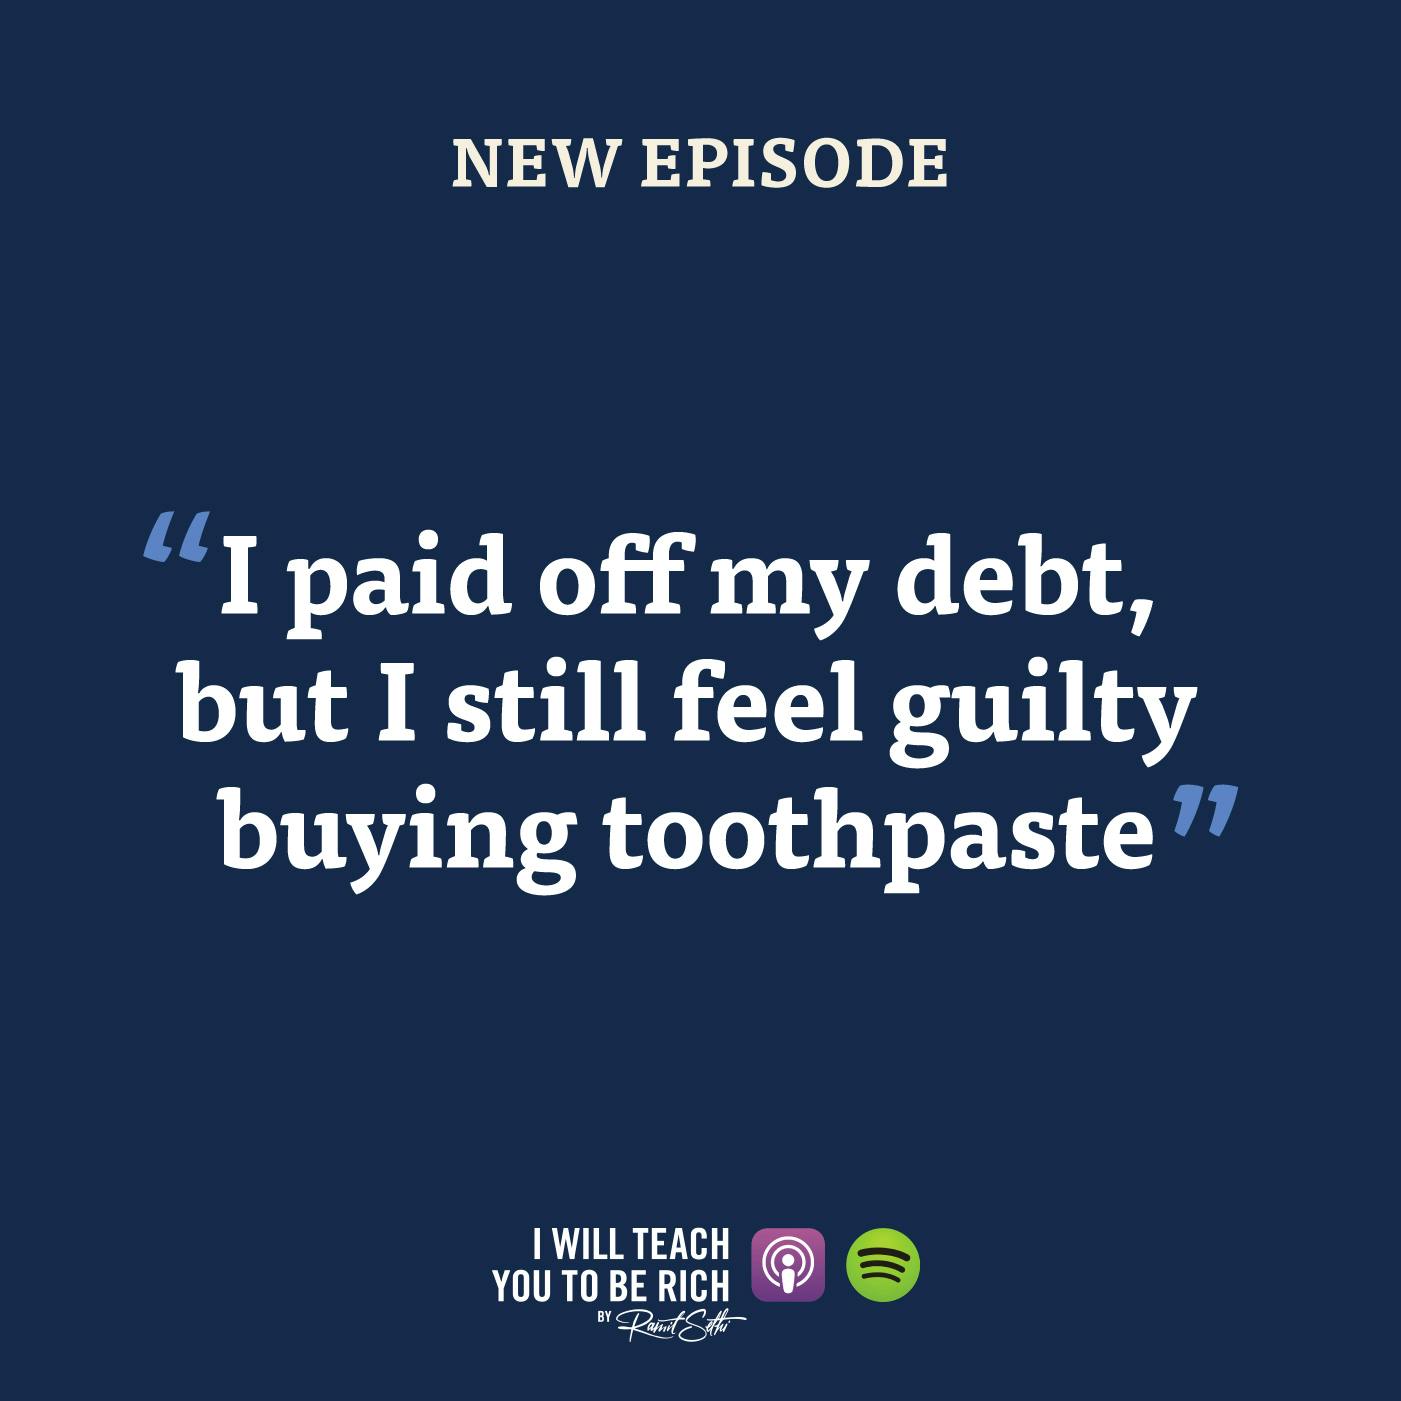 5. “I paid off $50,000 of debt, but I still feel guilty buying toothpaste”